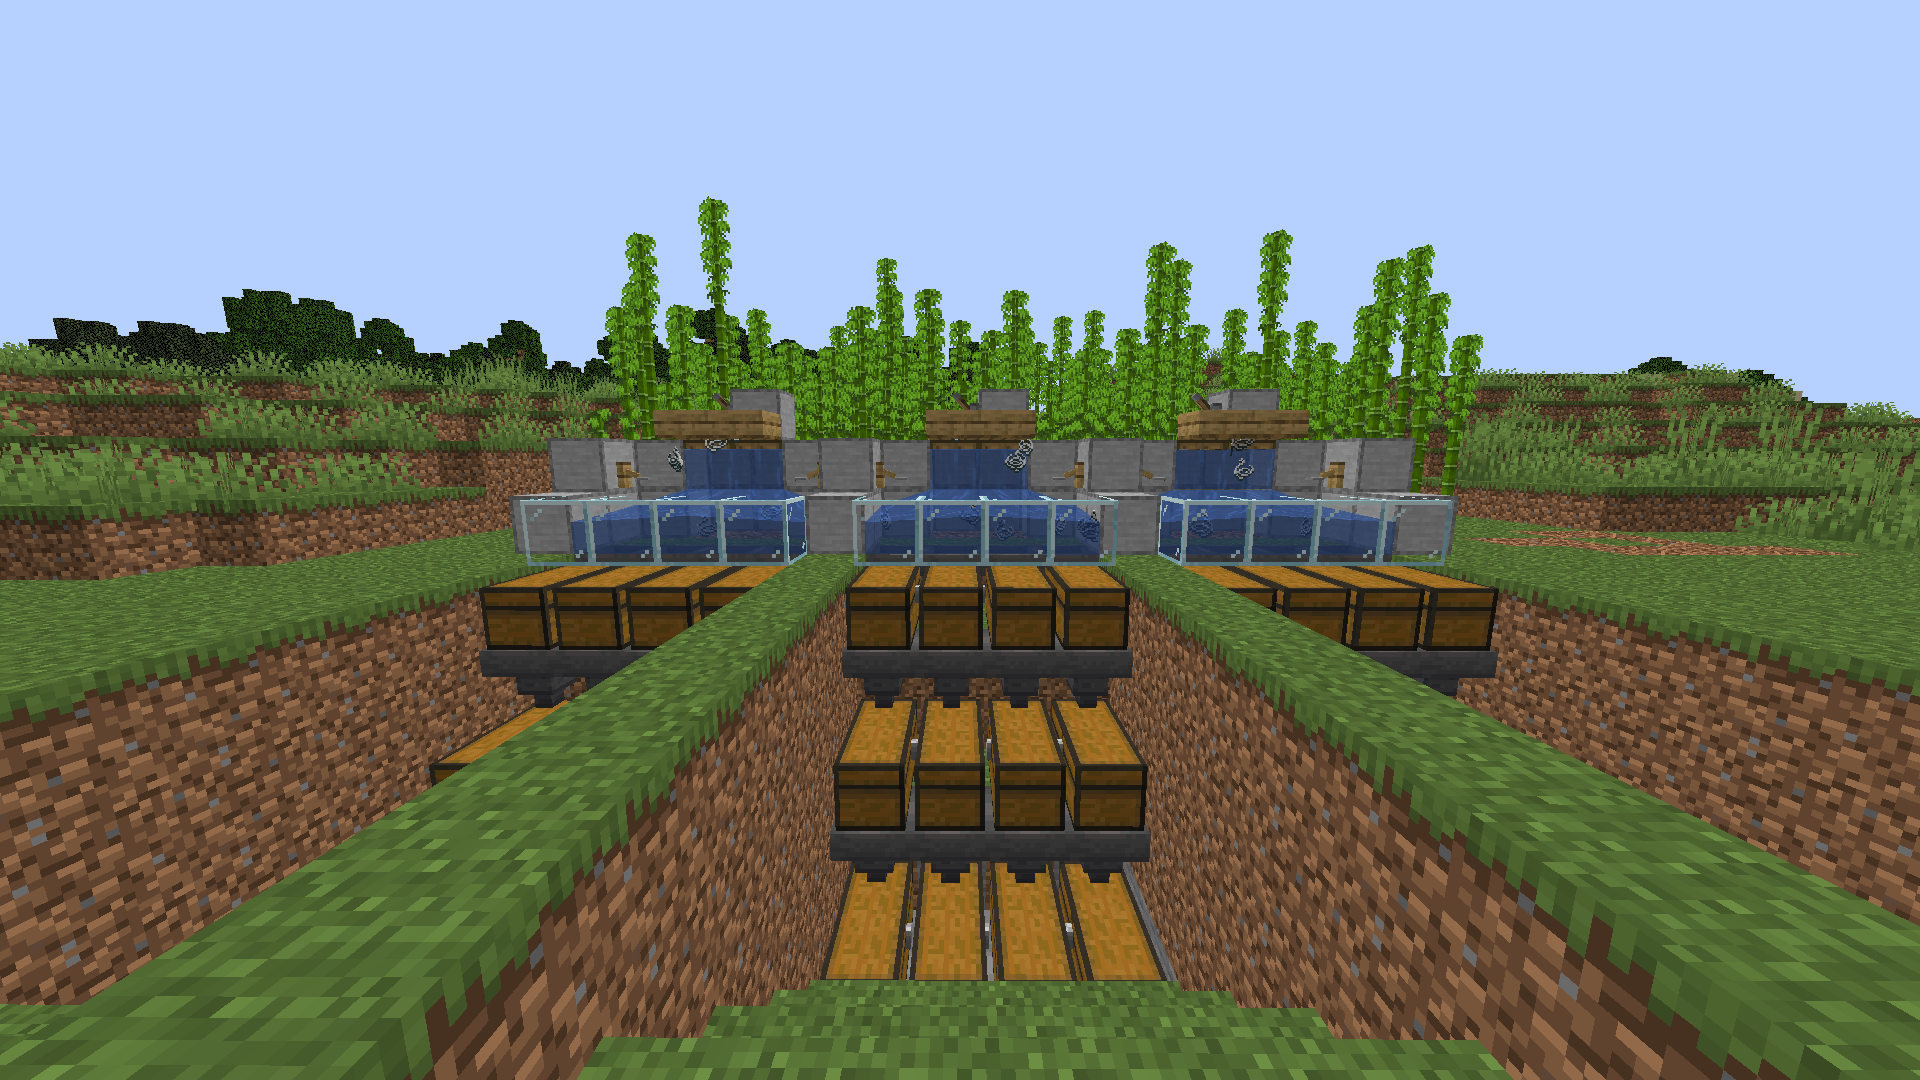 Minecract String Farm and manual bamboo farm schematic (litematic)